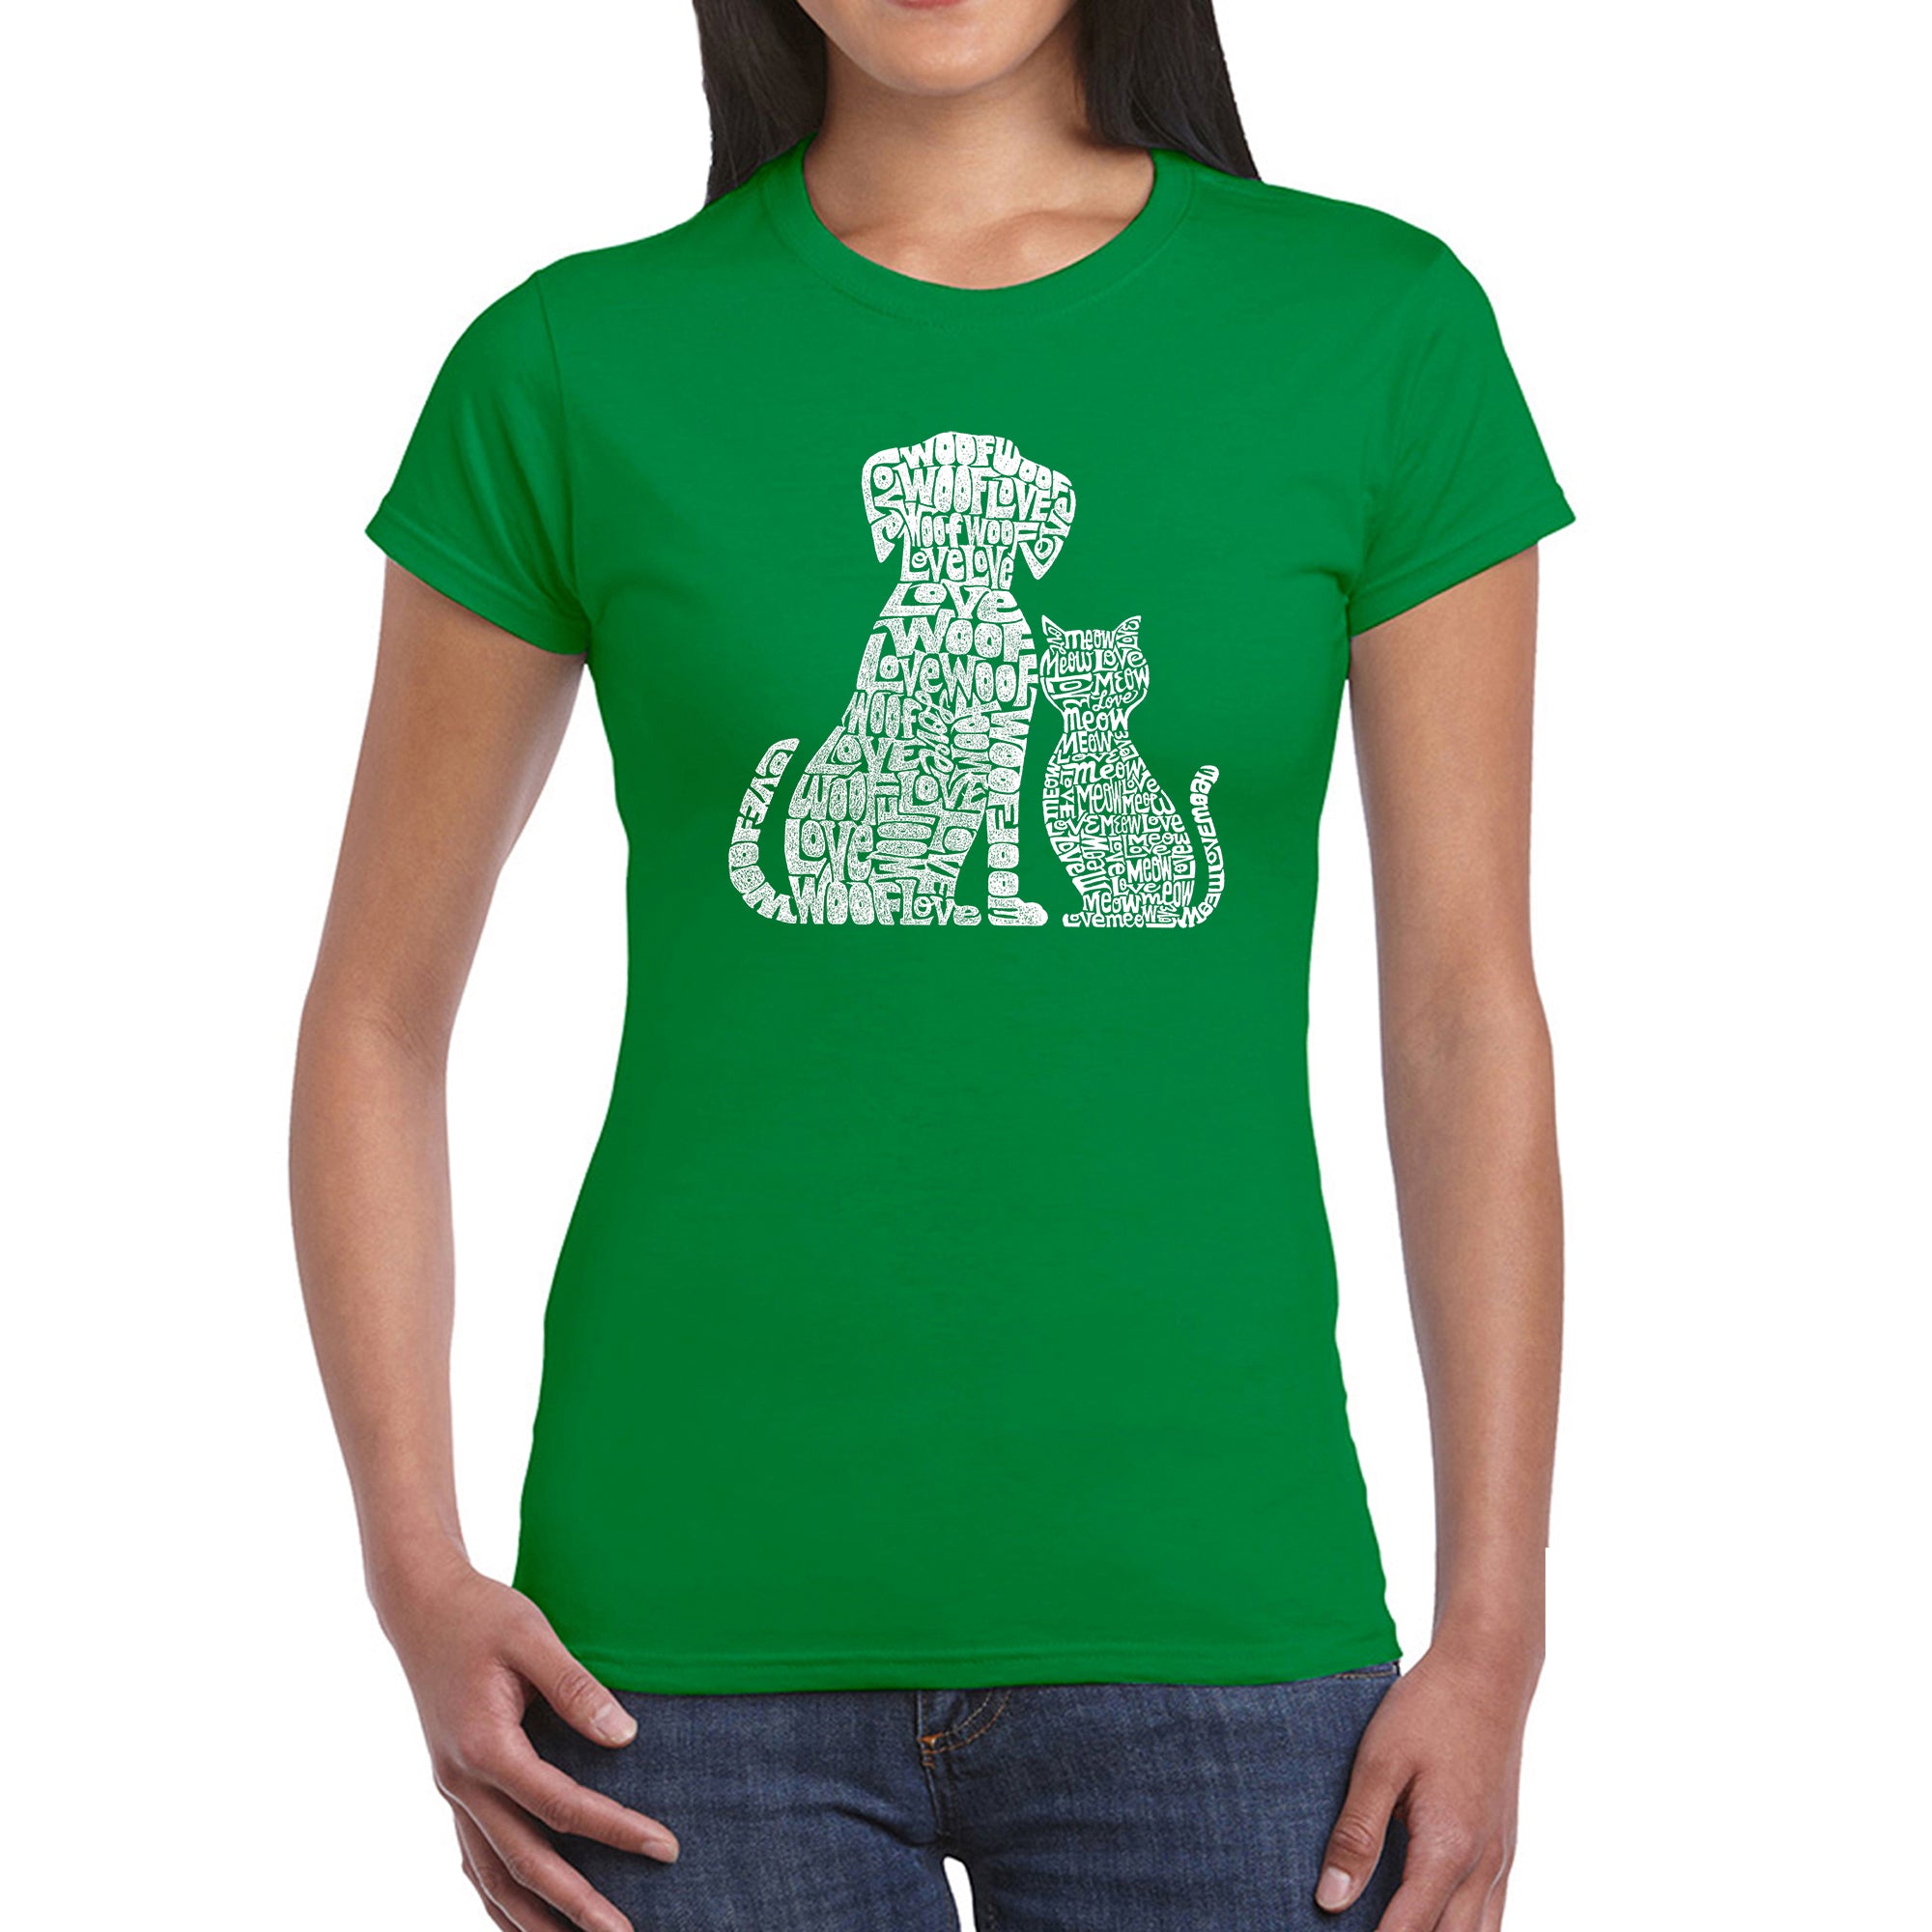 Dogs And Cats - Women's Word Art T-Shirt - Kelly - X-Large